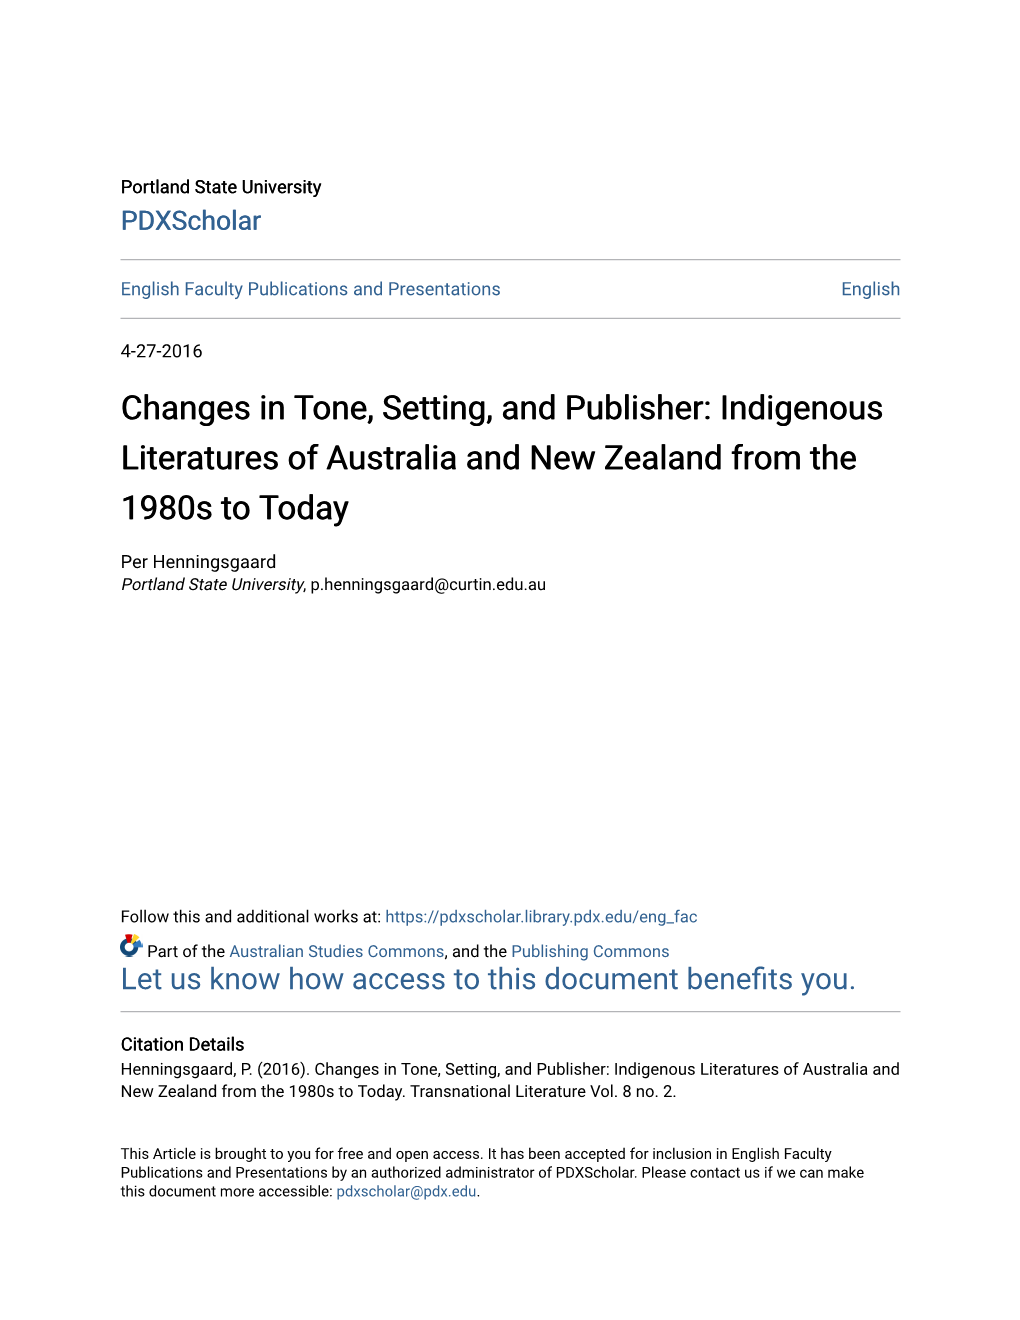 Indigenous Literatures of Australia and New Zealand from the 1980S to Today